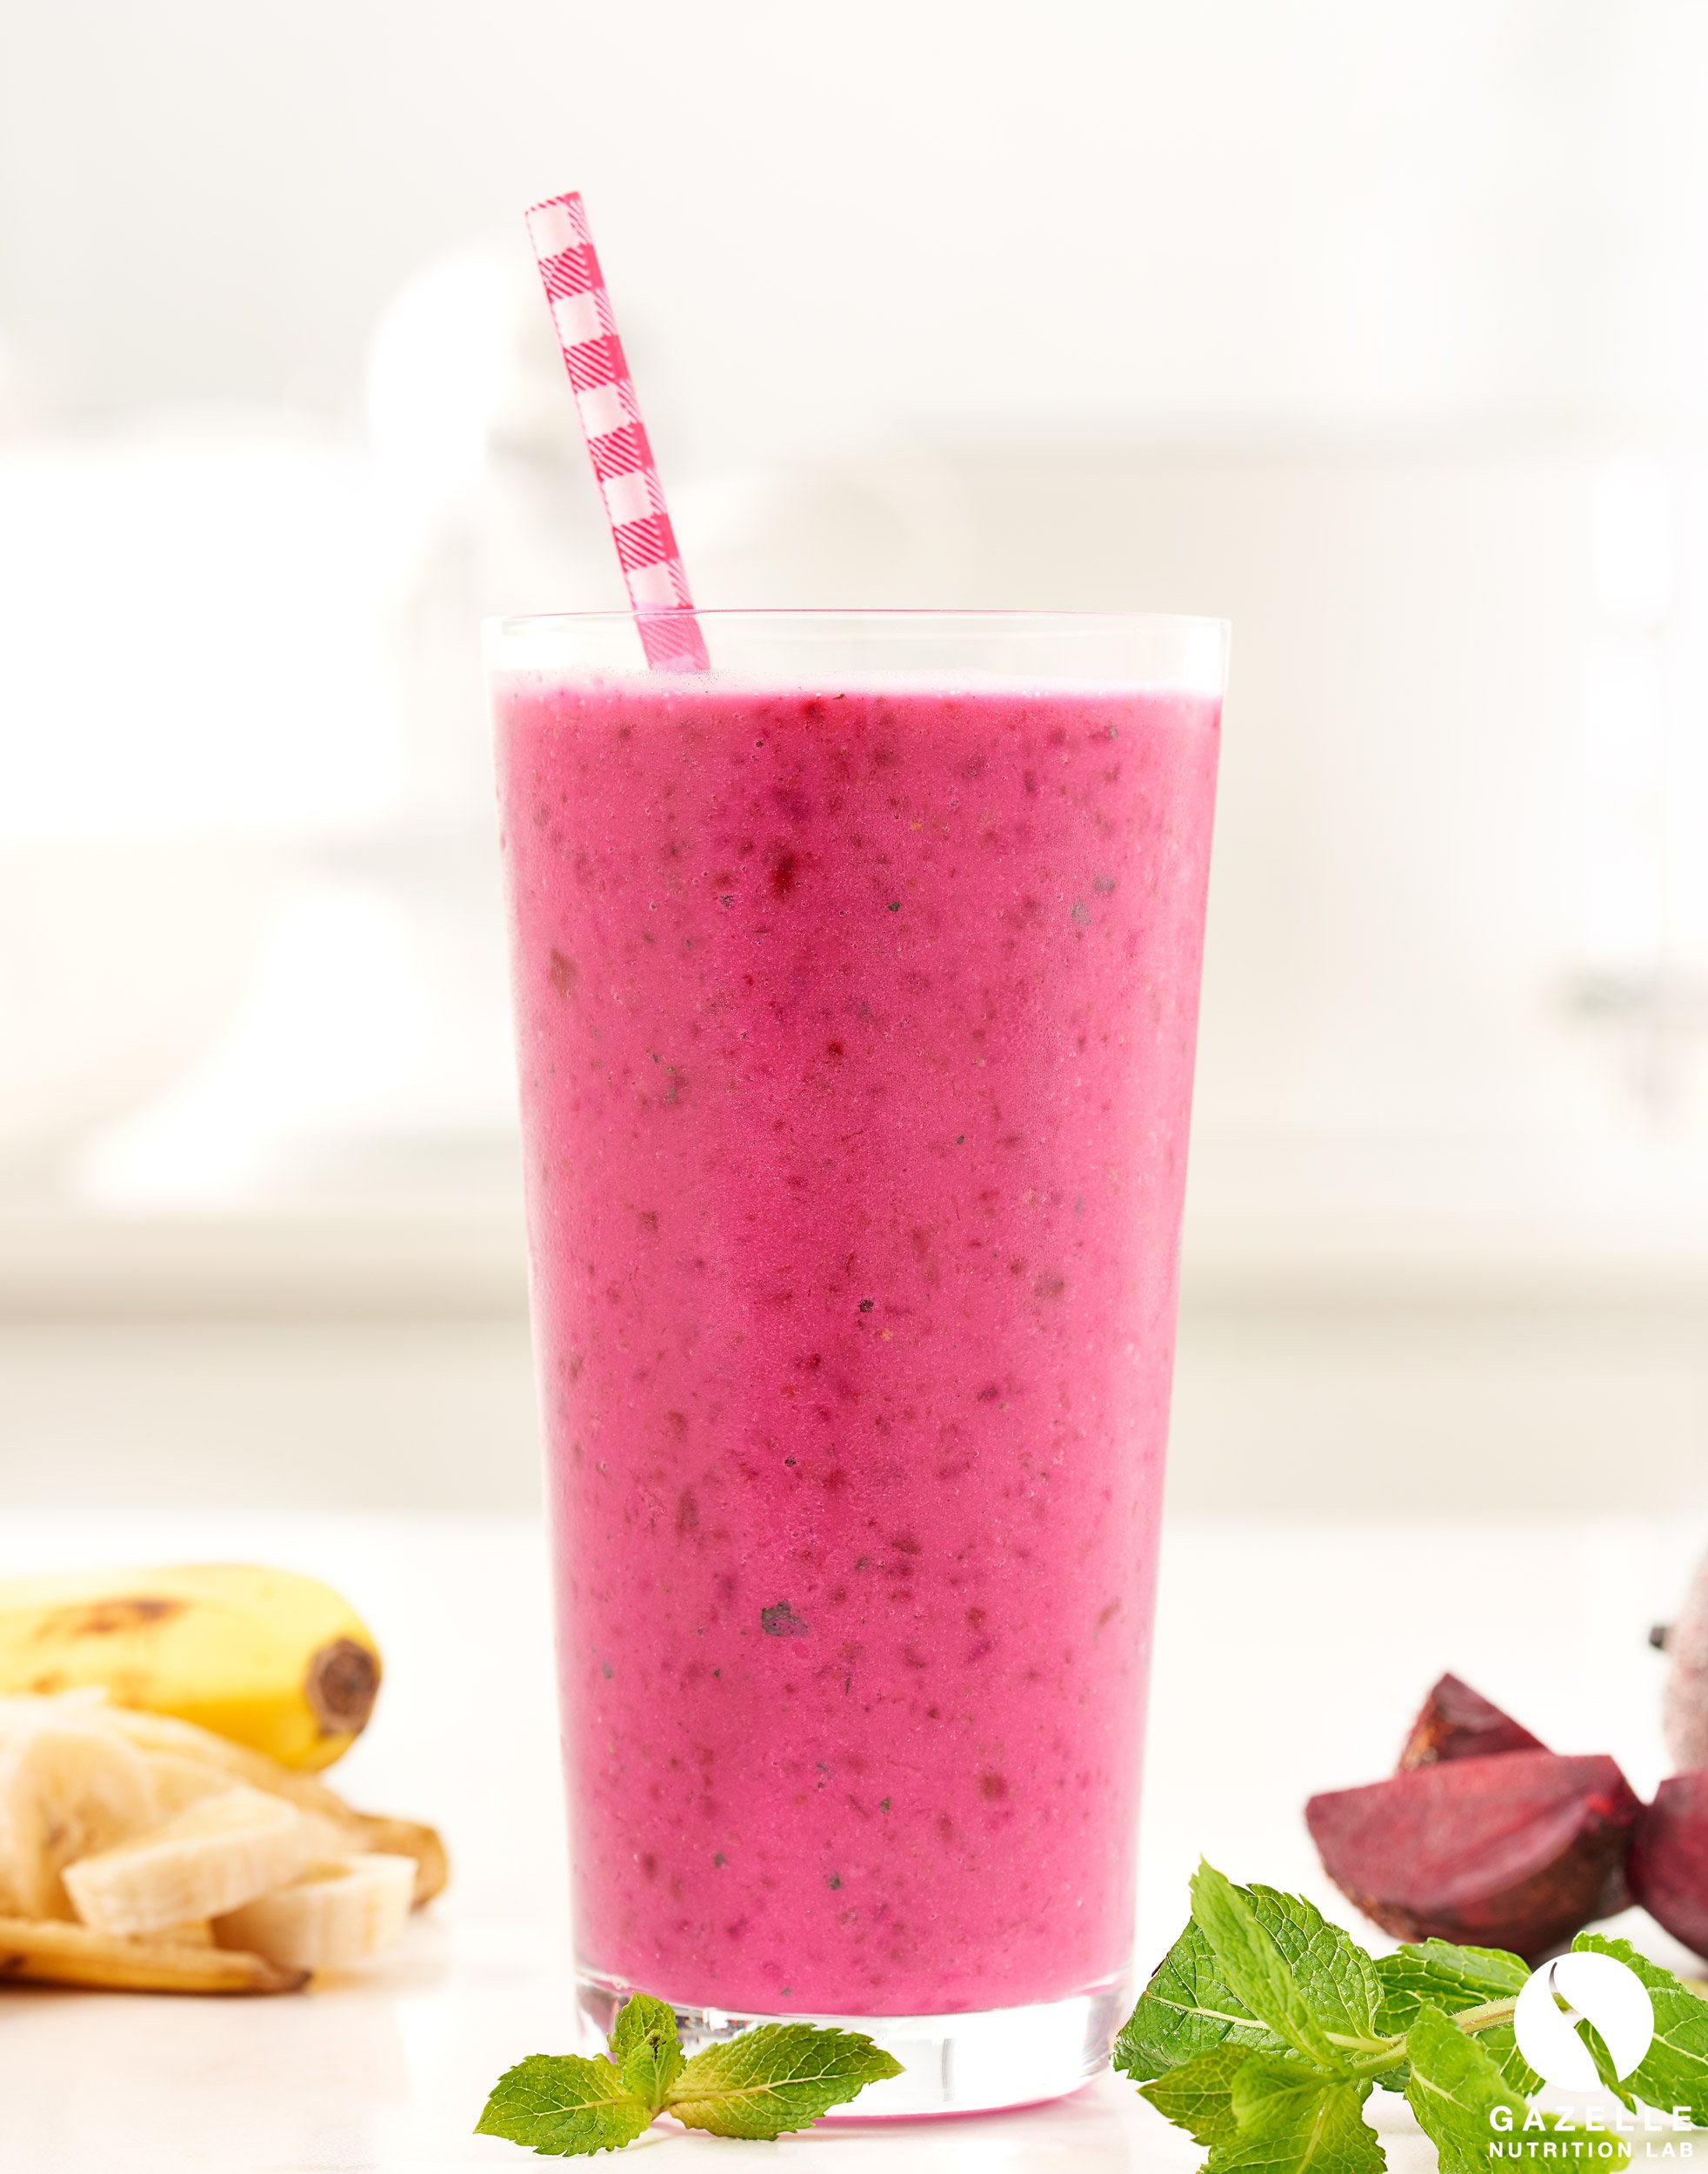 beet smoothie recipe for weight loss